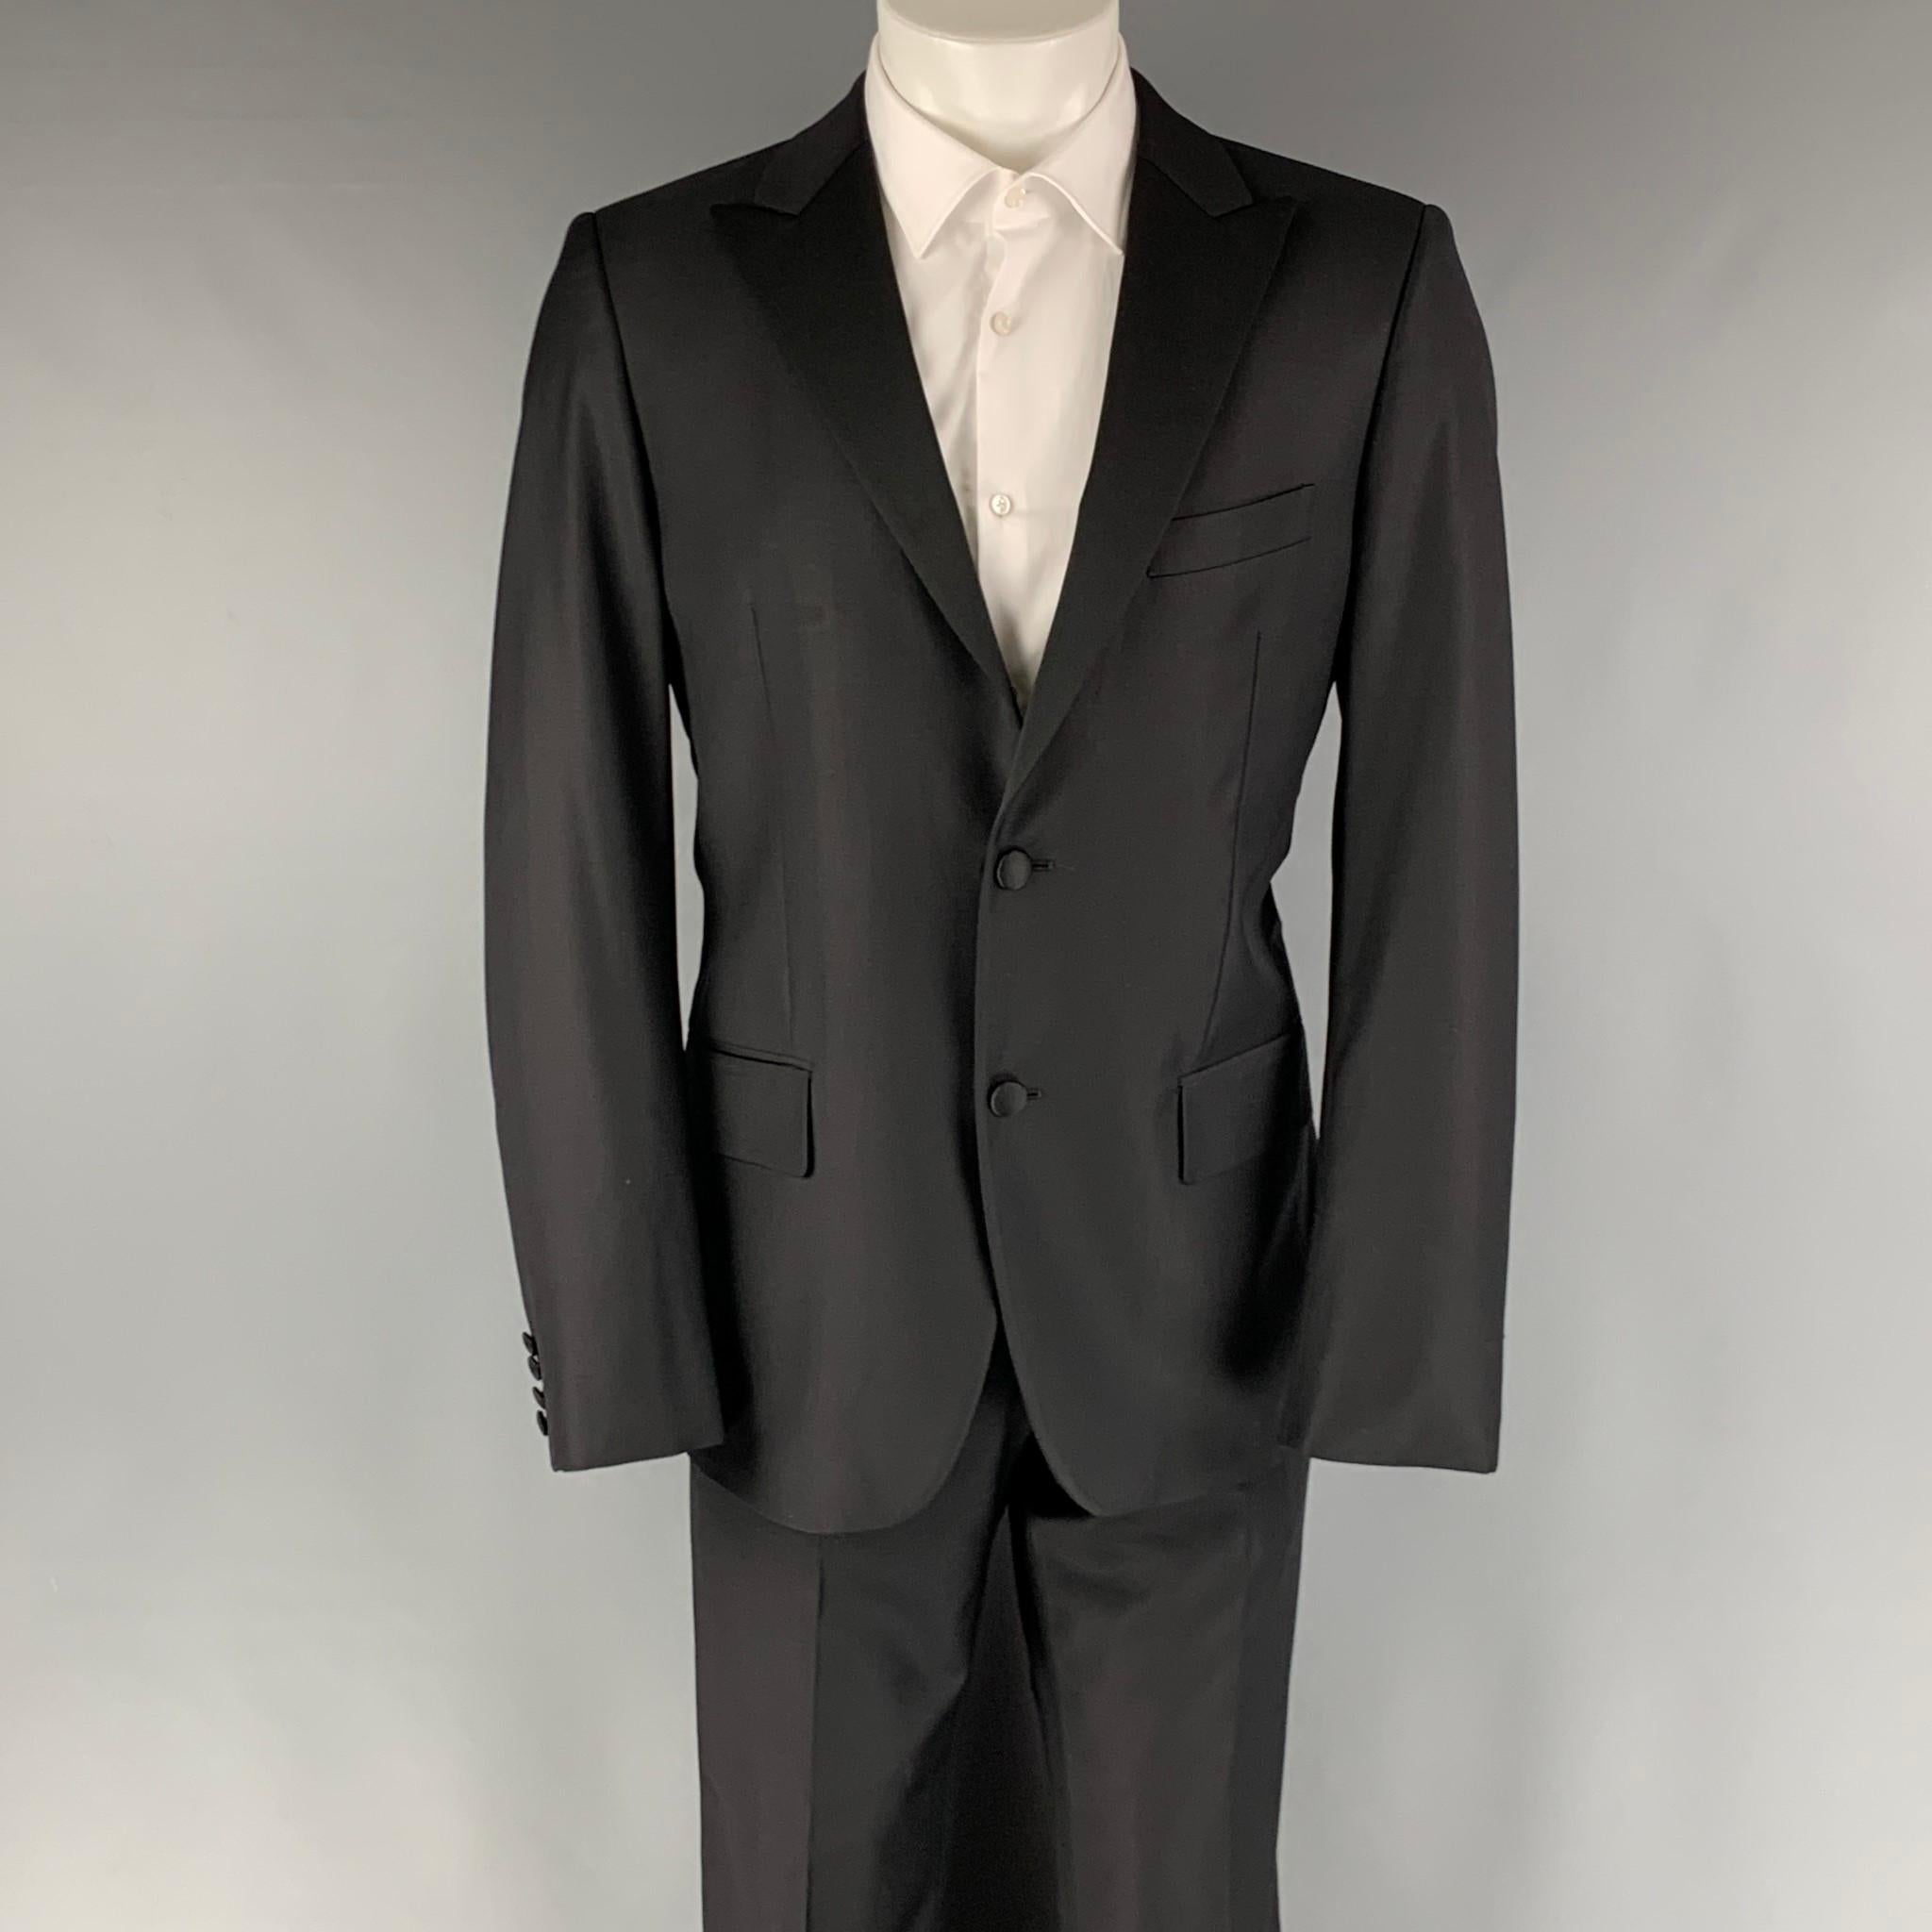 CALVIN KLEIN COLLECTION tuxedo comes in a black wool with a full liner and includes a single breasted, two buttons sport coat with a peak lapel and matching flat front trousers.

Excellent Pre-Owned Condition.
Marked: